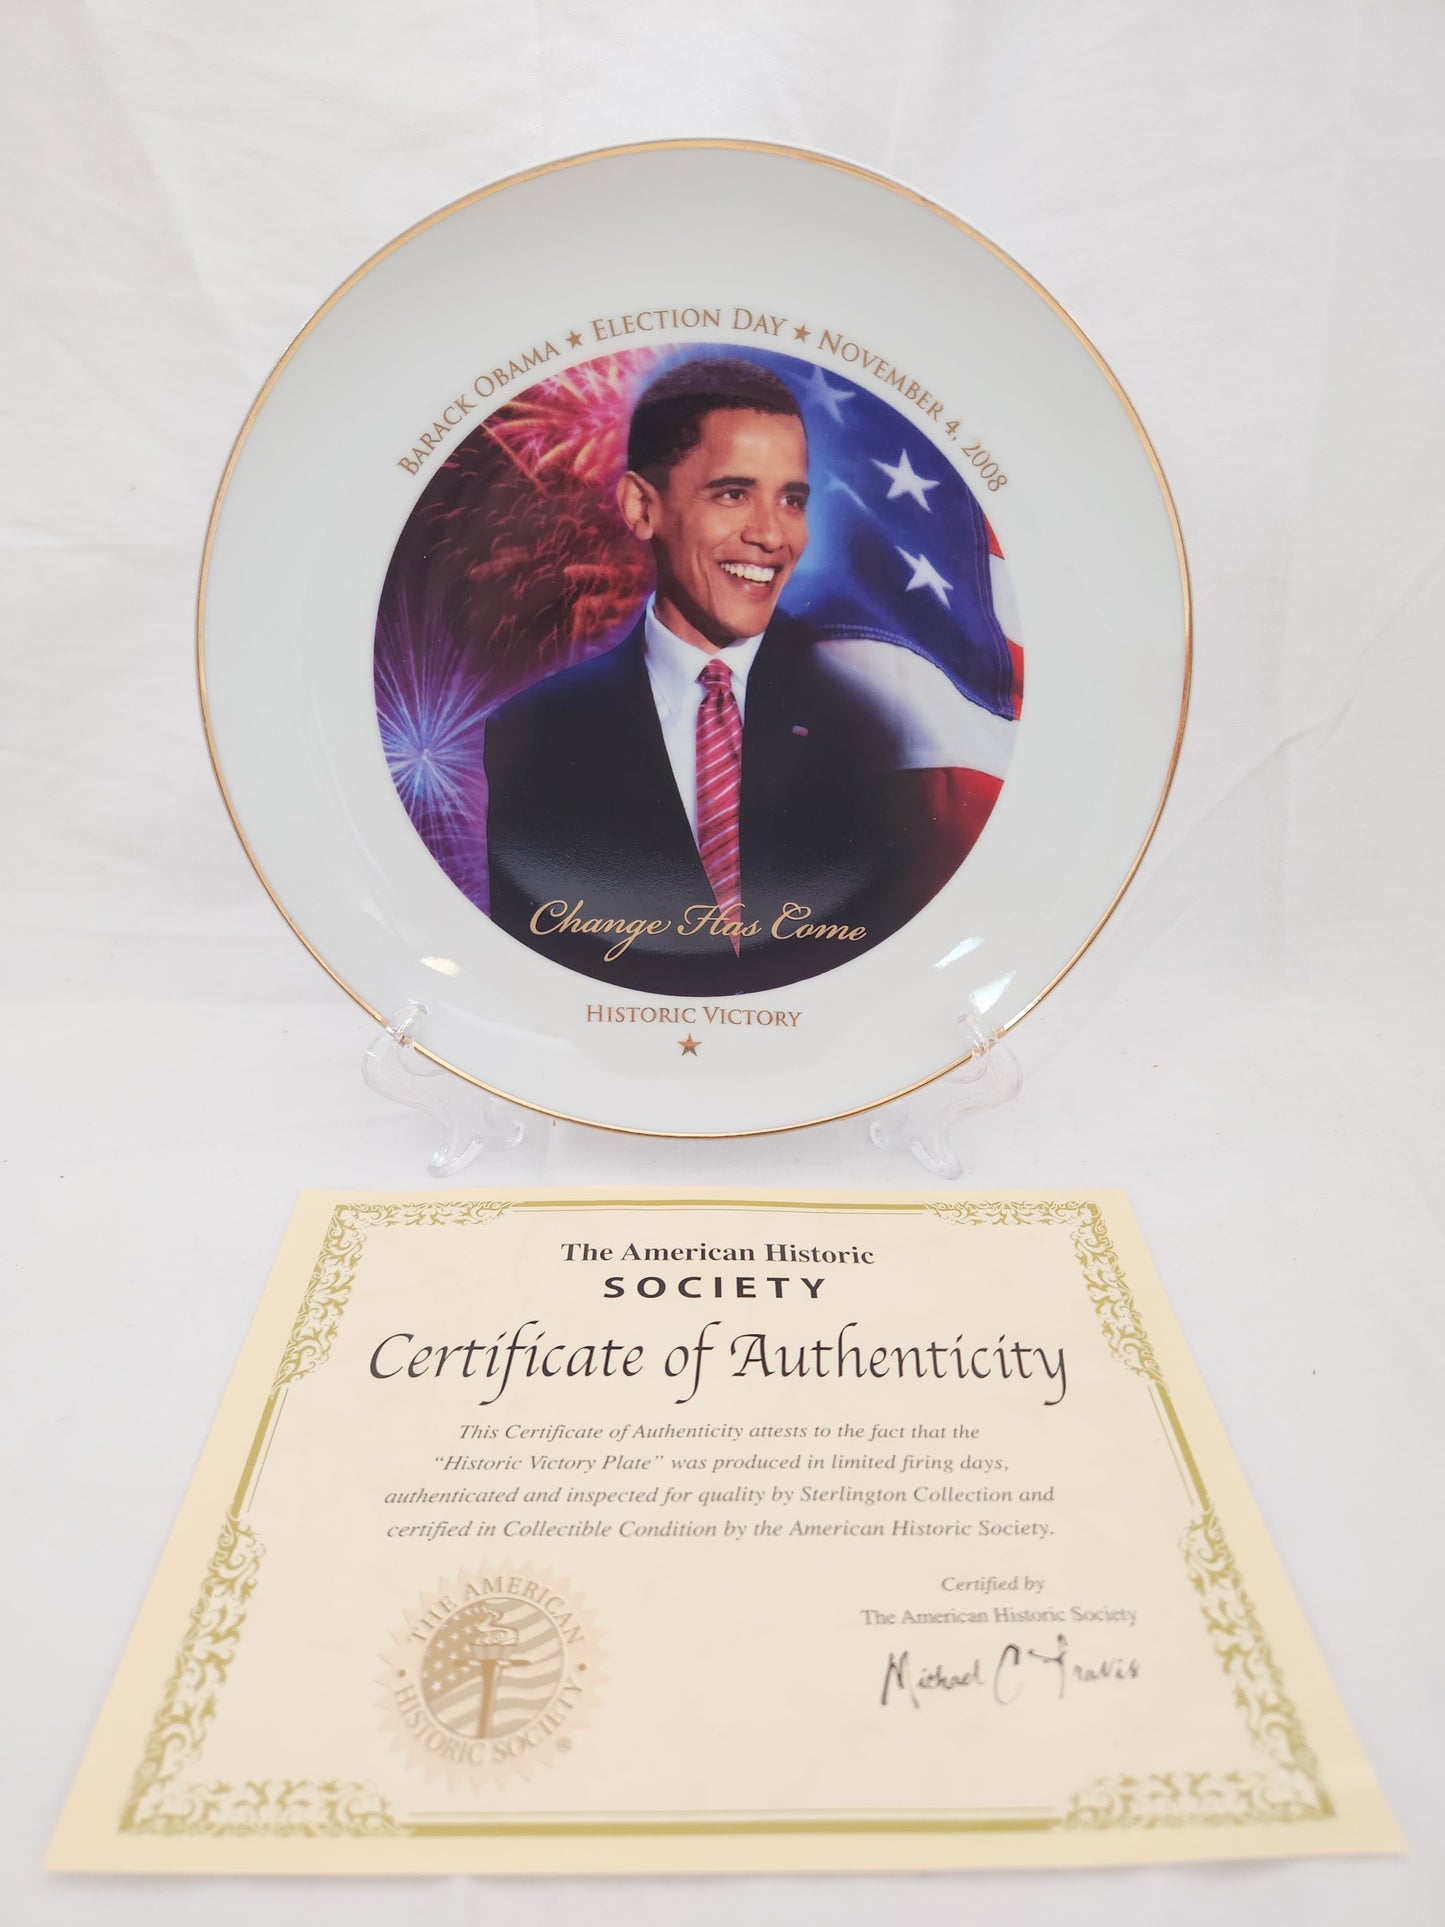 Historic Victory Barack Obama 22k Gold Rim Collectable Plate - Limited Edition